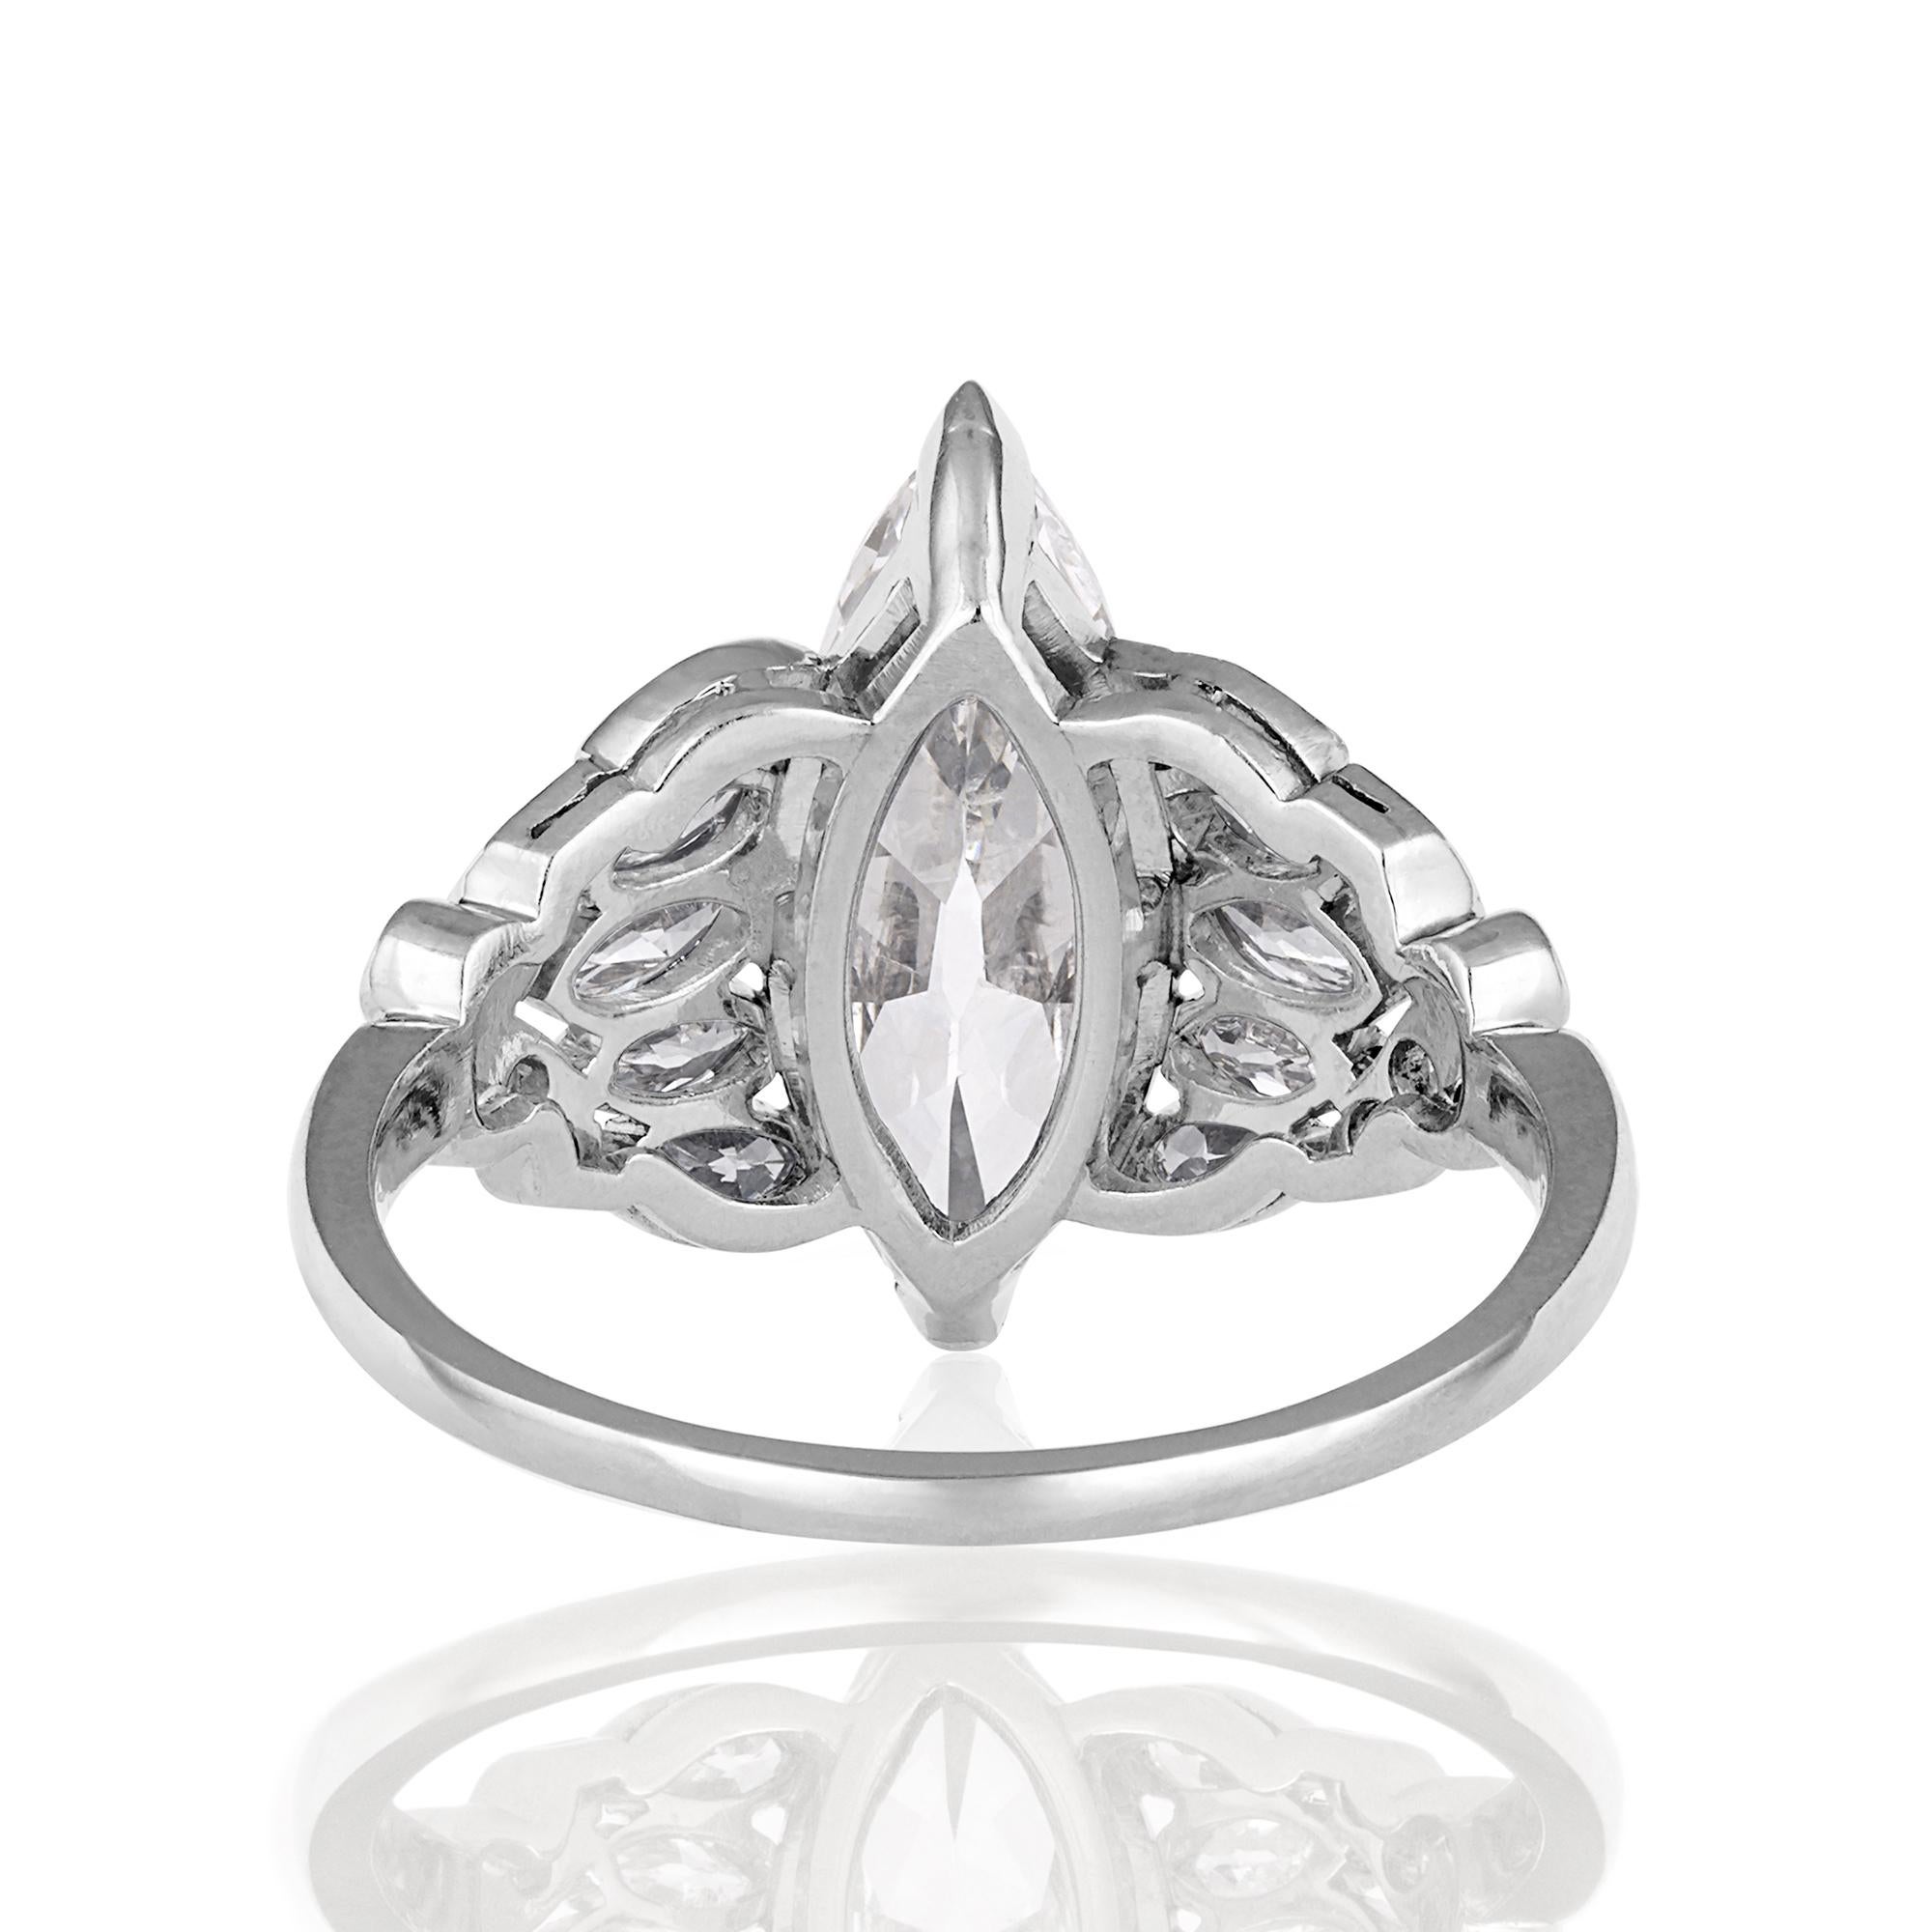 Women's Art Deco Colorless GIA 3.09 ct Old European Marquise Cut Diamond Platinum Ring For Sale